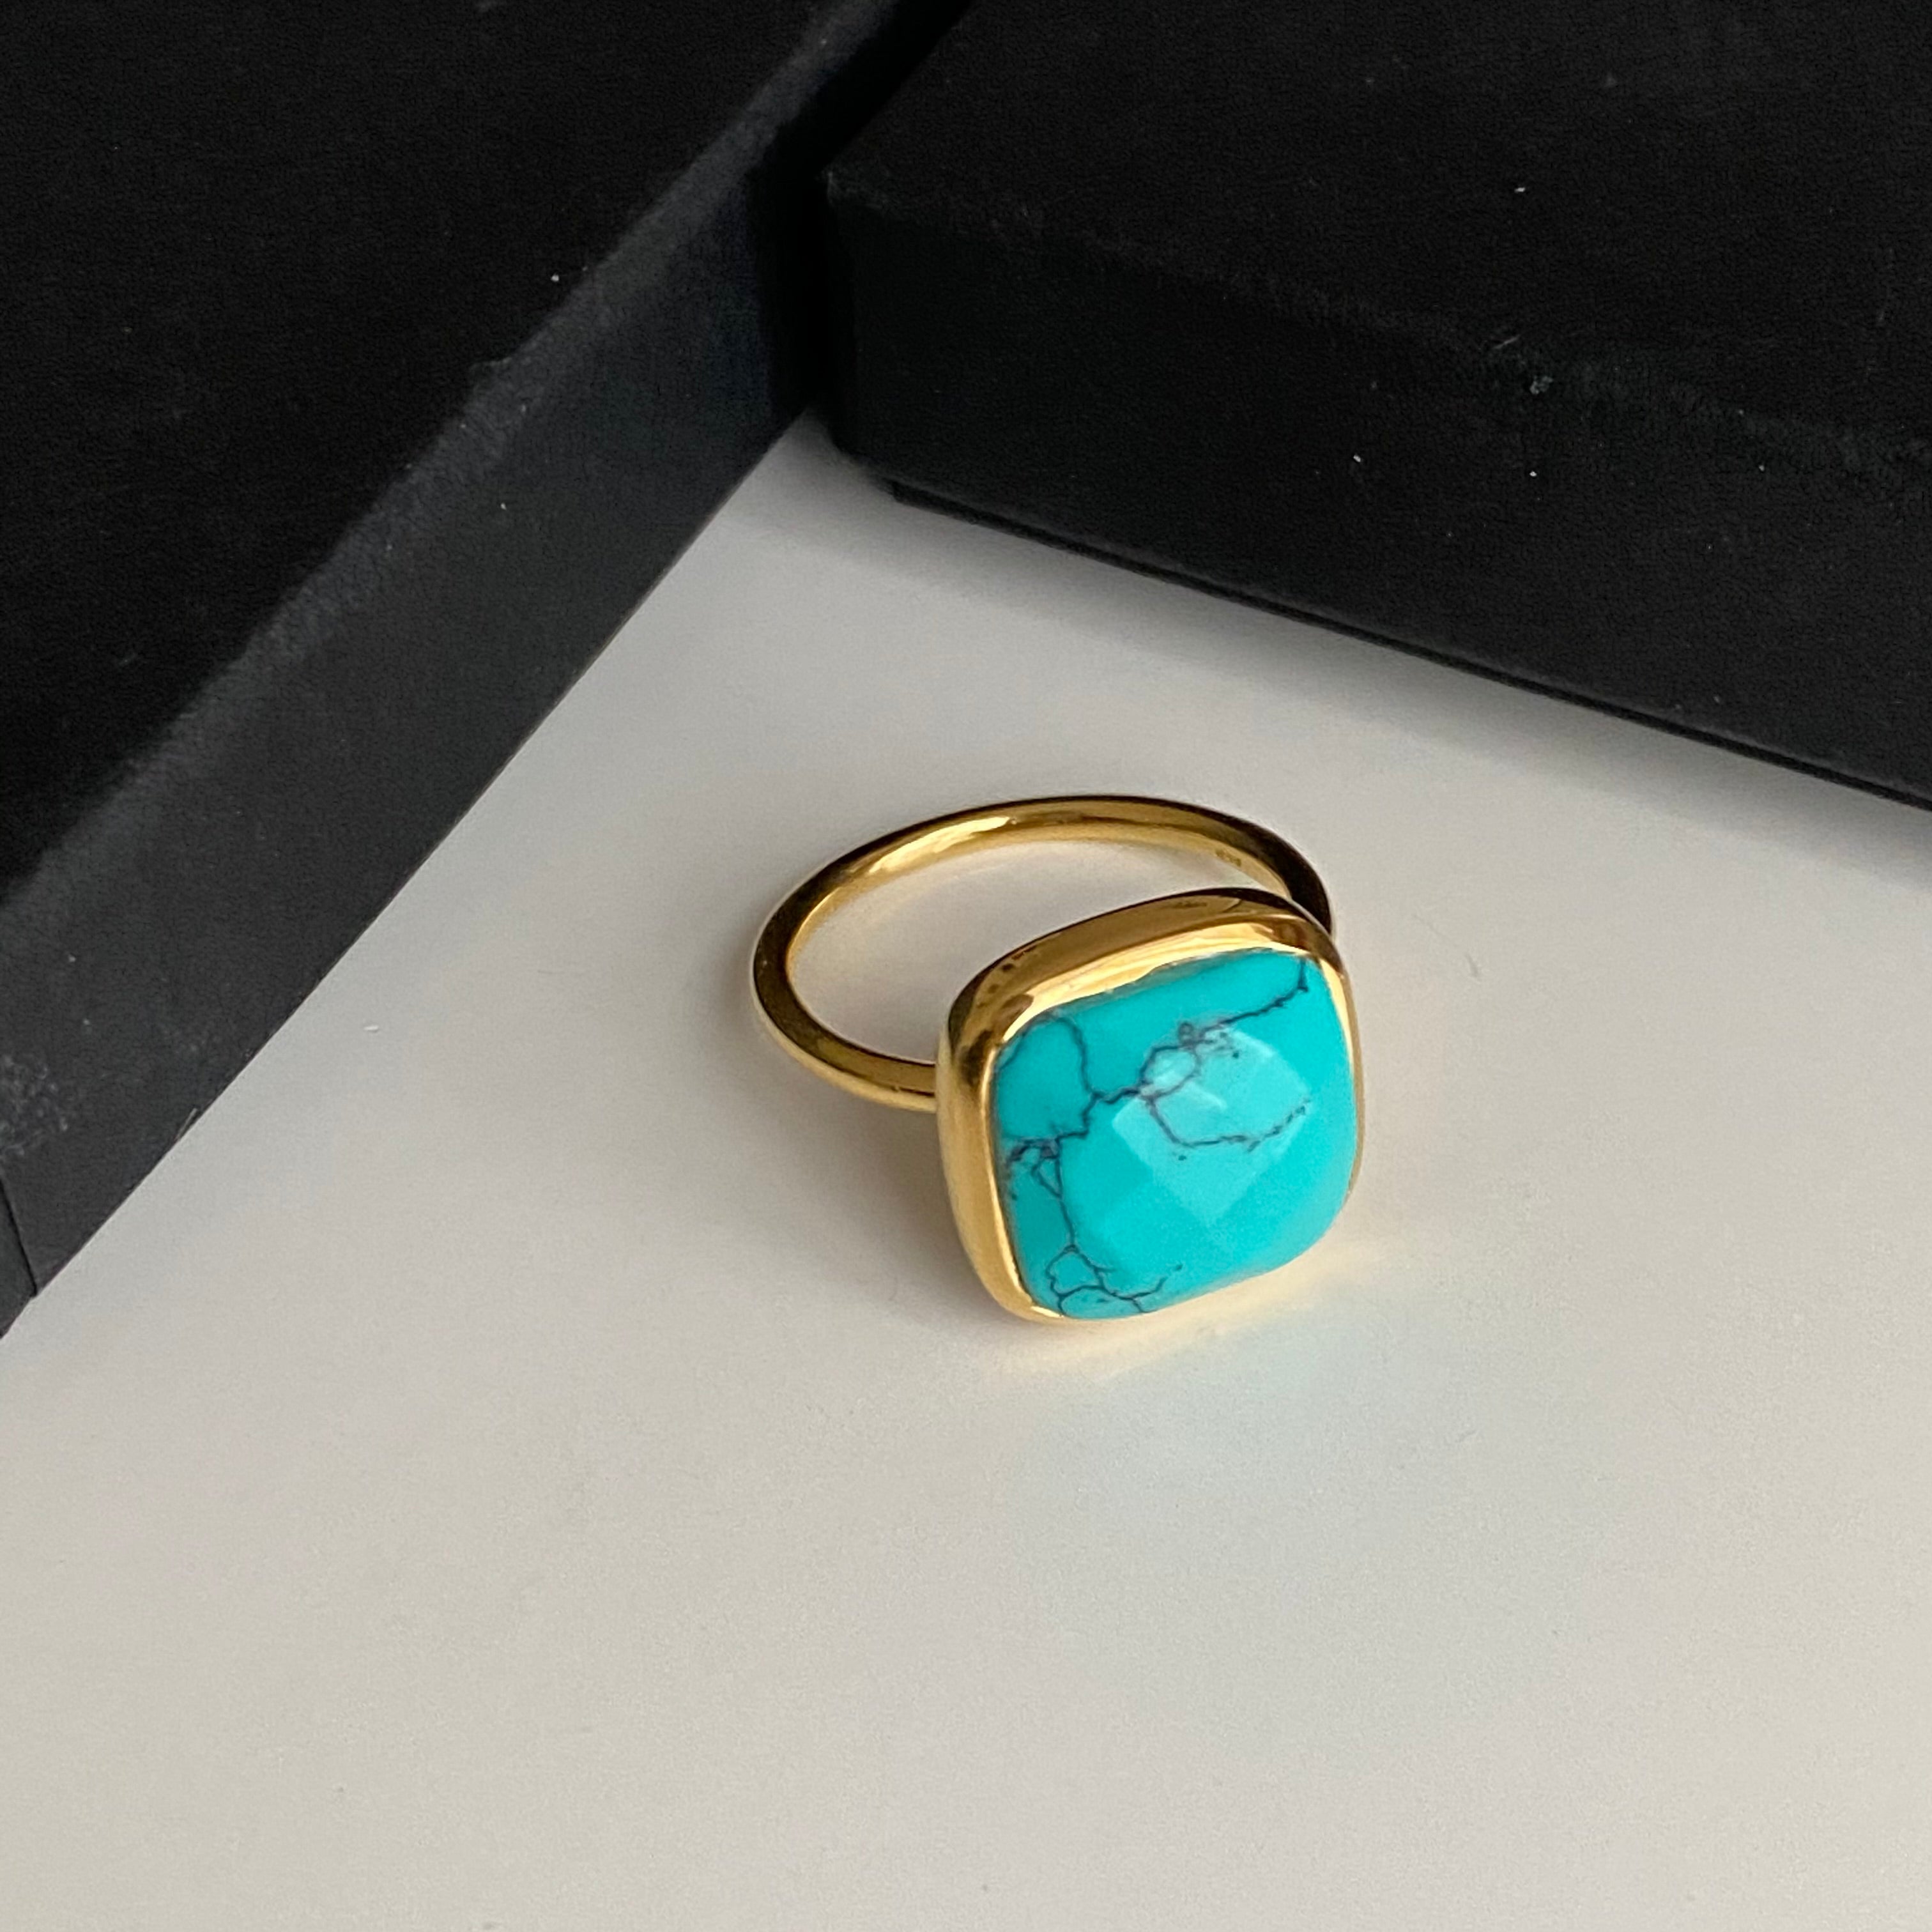 Gold Plated Silver Ring with Square Semiprecious Stone - Turquoise